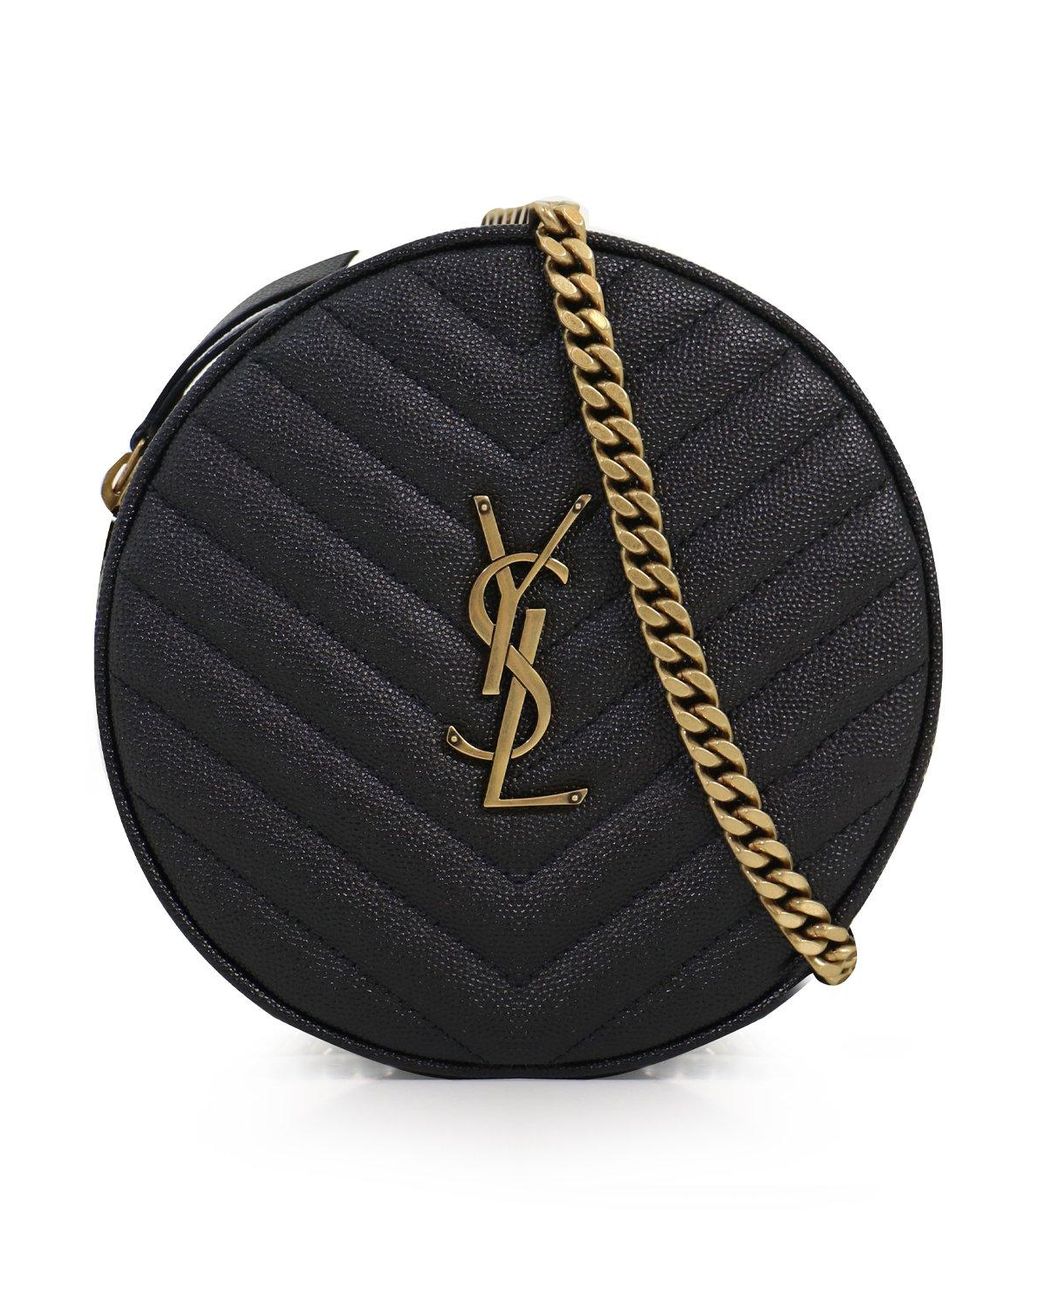 Saint Laurent Leather Monogramme Quilted Circle Bag Black/gold - Lyst